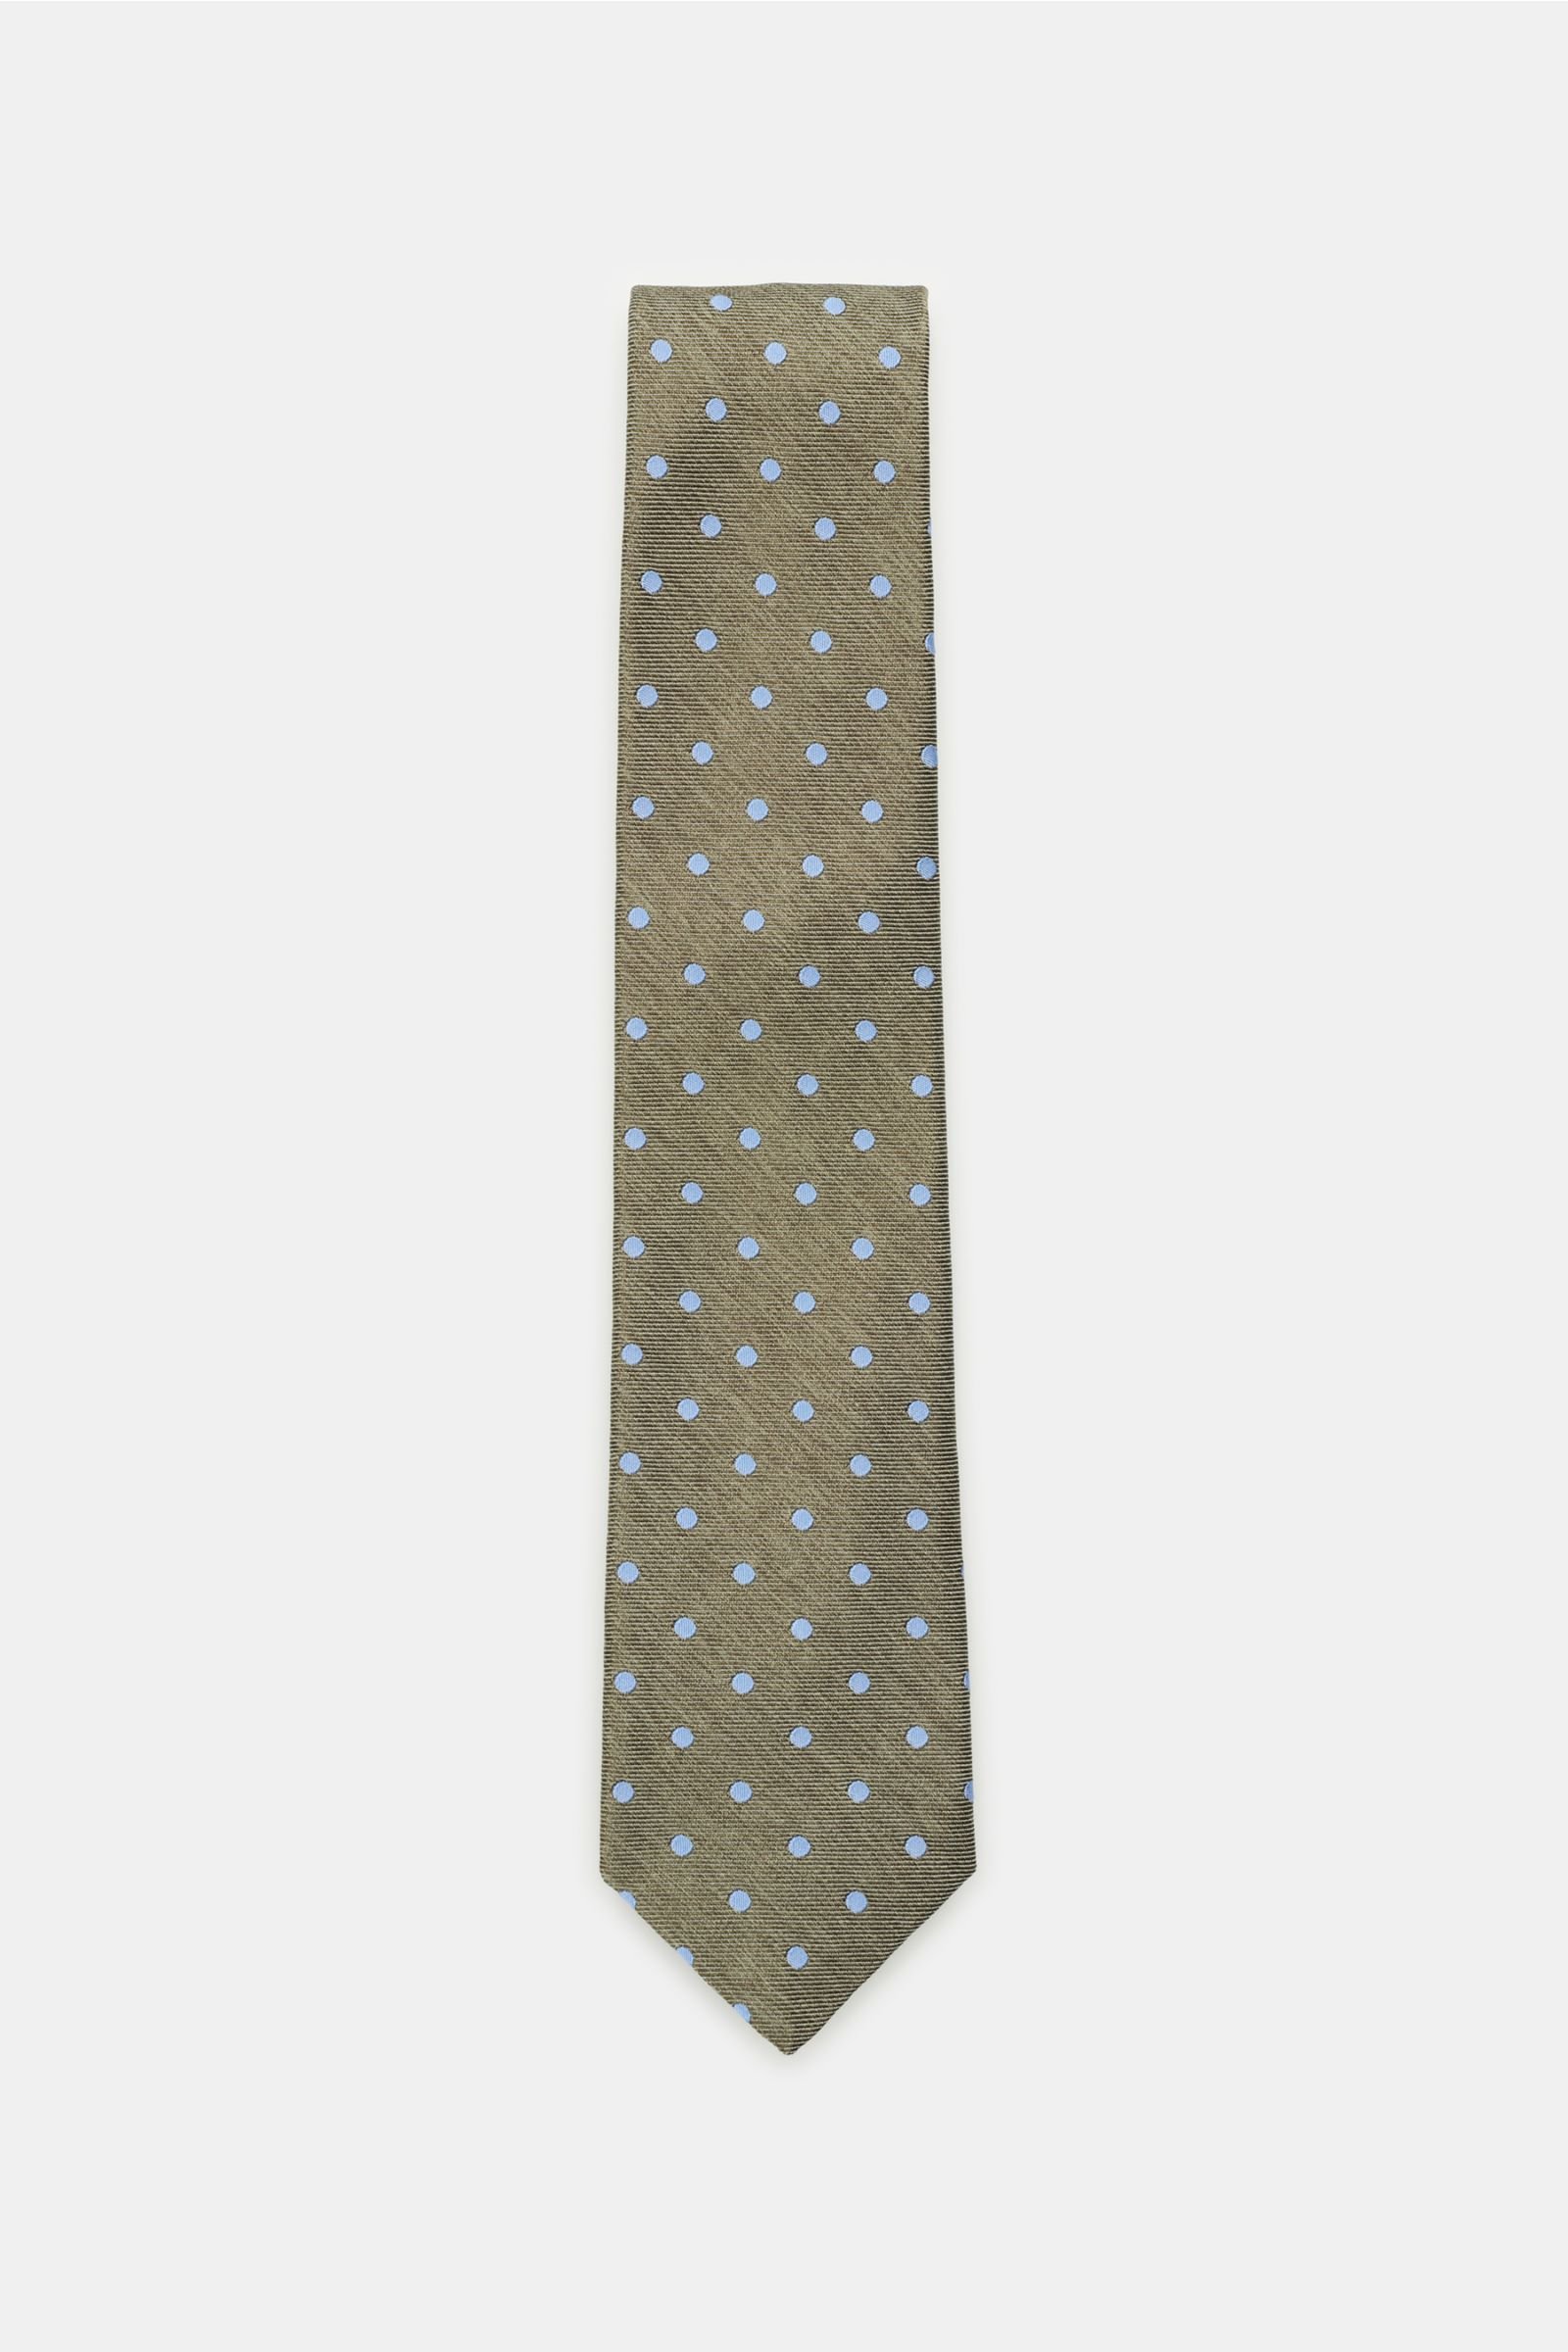 Tie olive with polka dots